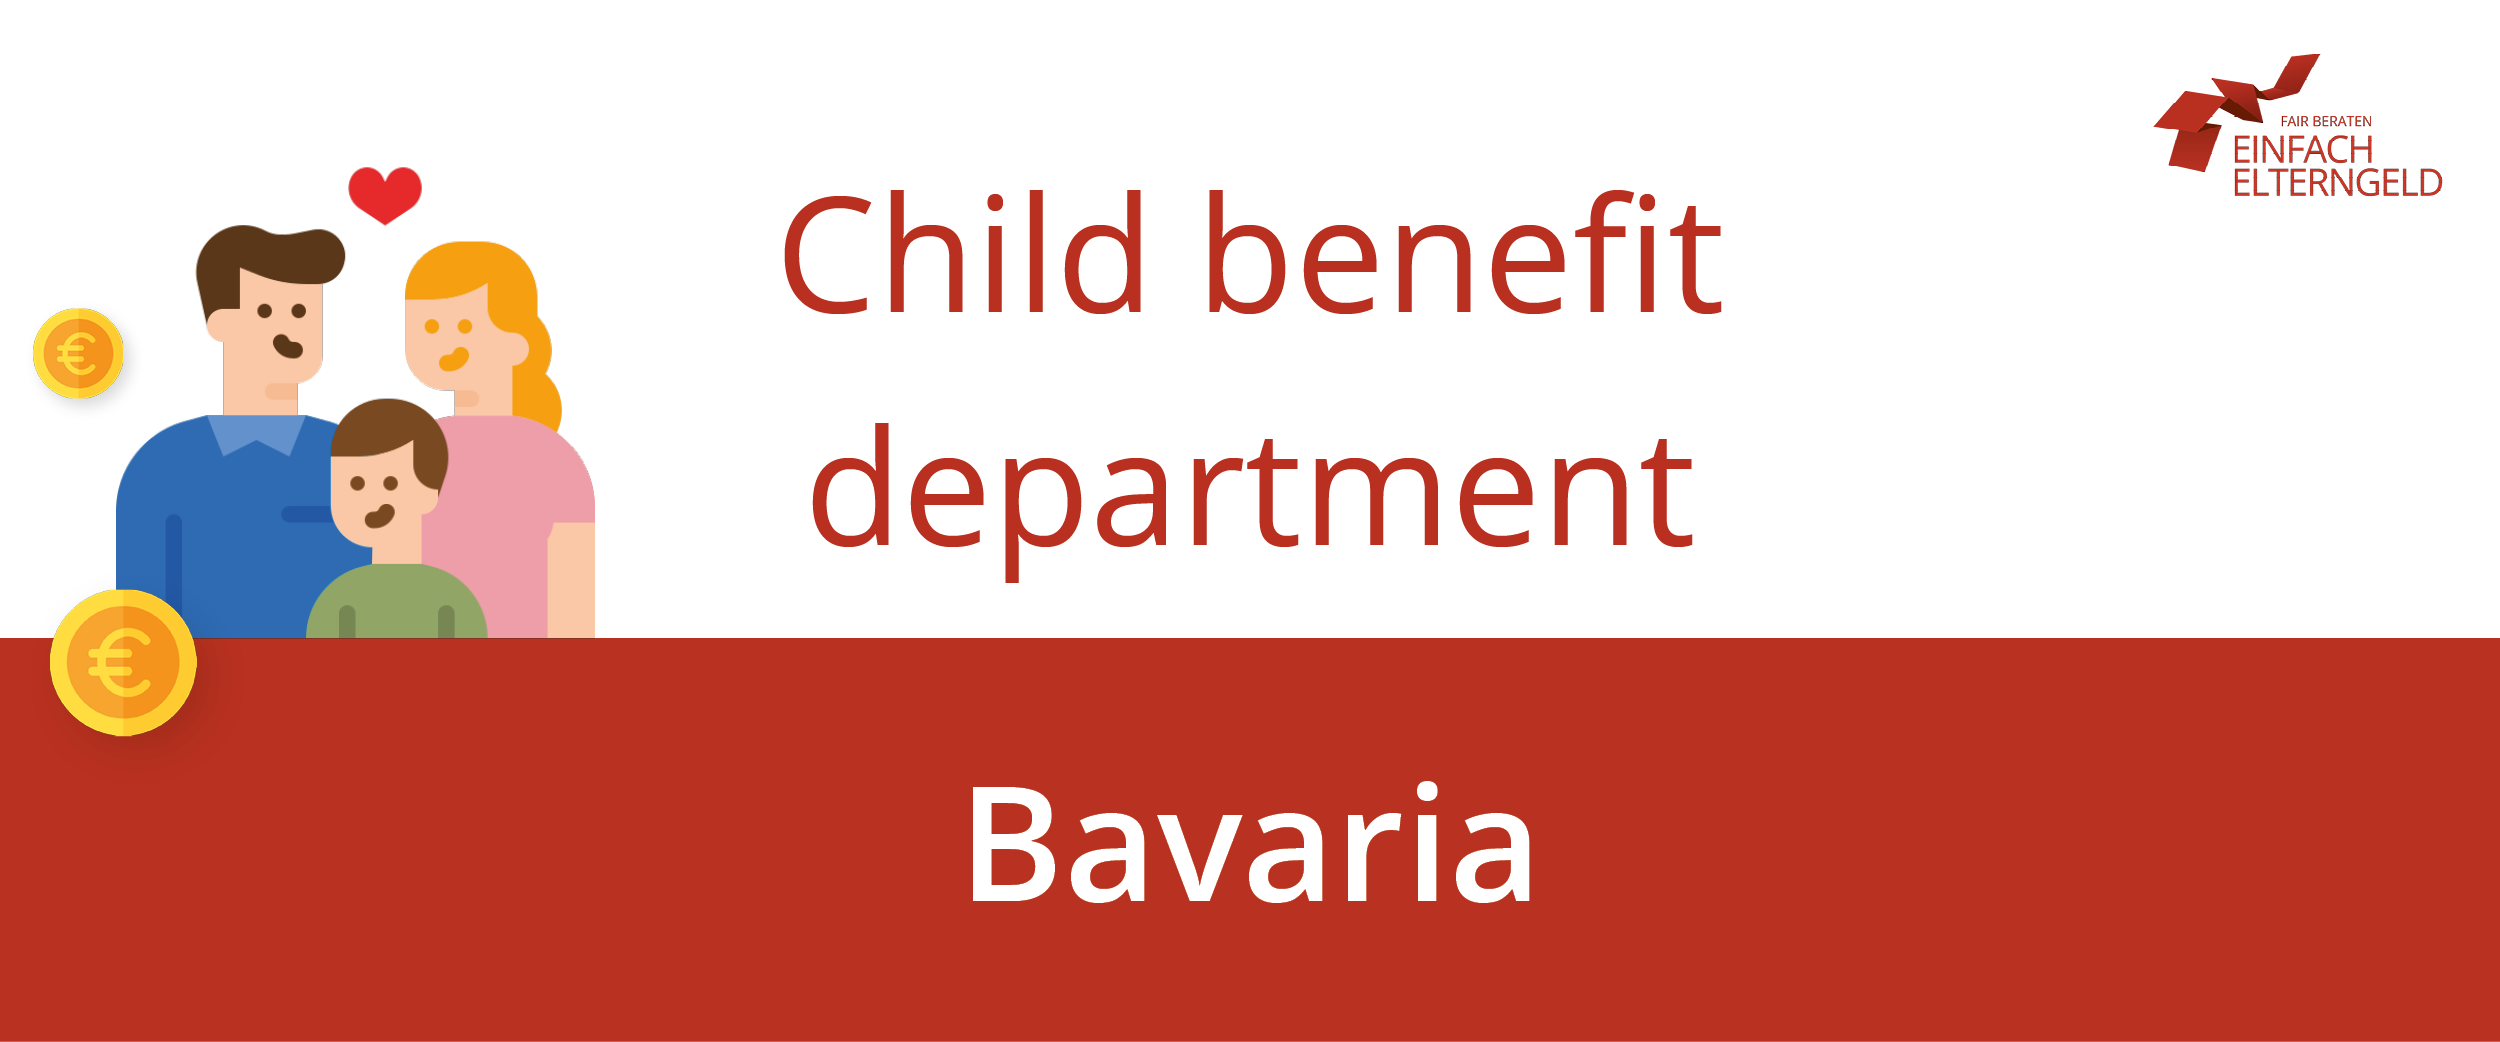 We introduce you to the child benefit department Bavaria.